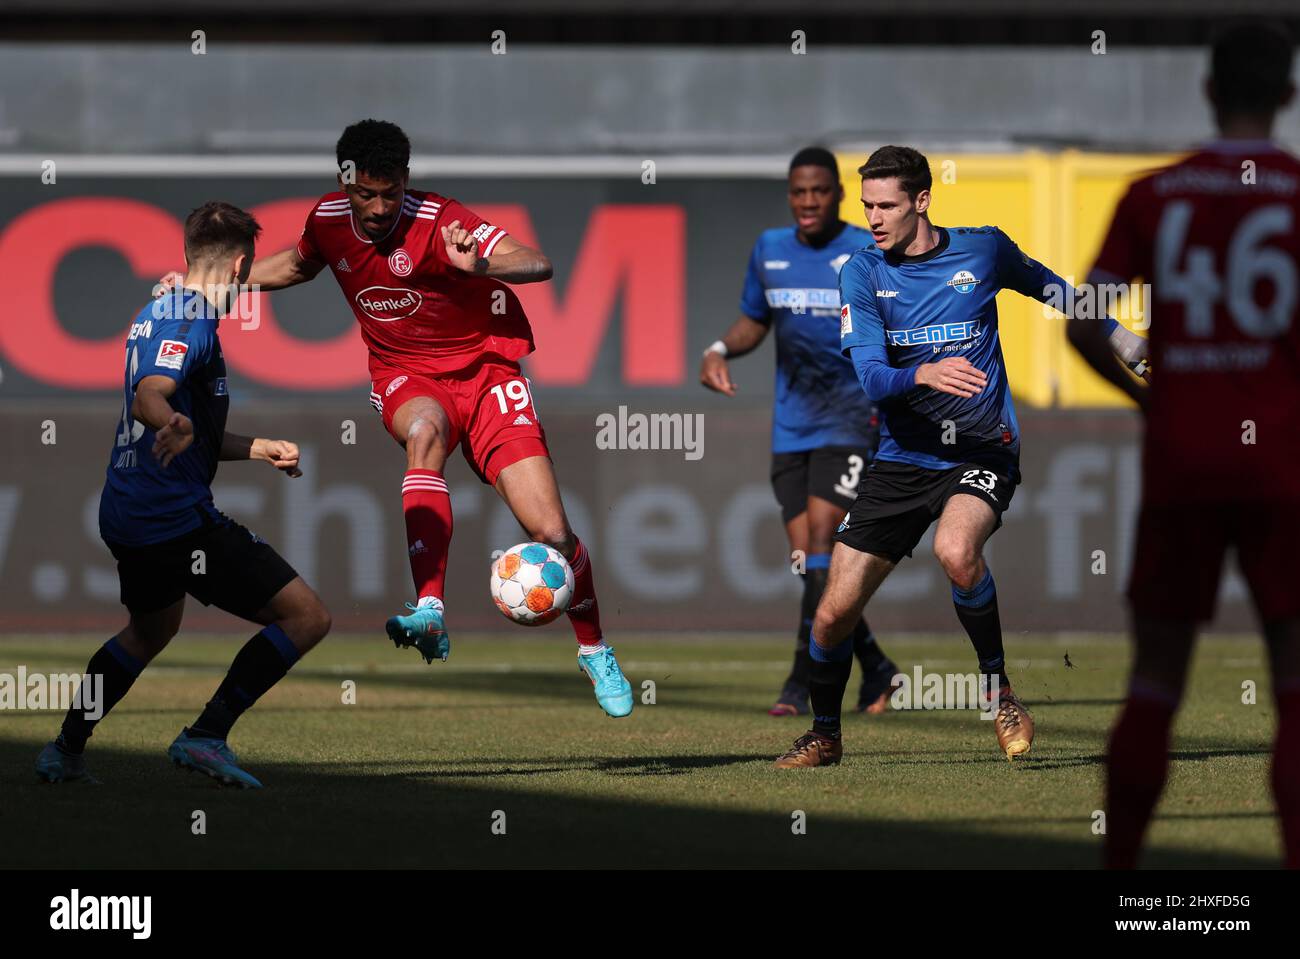 Paderborn, Germany. 12th Mar, 2022. Soccer: 2nd Bundesliga, SC Paderborn 07 - Fortuna Düsseldorf, Matchday 26 at Benteler Arena. Paderborn's Maximilian Thalhammer (r) battles for the ball with Düsseldorf's Emmanuel Iyoha (2nd from left). Credit: Friso Gentsch/dpa - IMPORTANT NOTE: In accordance with the requirements of the DFL Deutsche Fußball Liga and the DFB Deutscher Fußball-Bund, it is prohibited to use or have used photographs taken in the stadium and/or of the match in the form of sequence pictures and/or video-like photo series./dpa/Alamy Live News Stock Photo